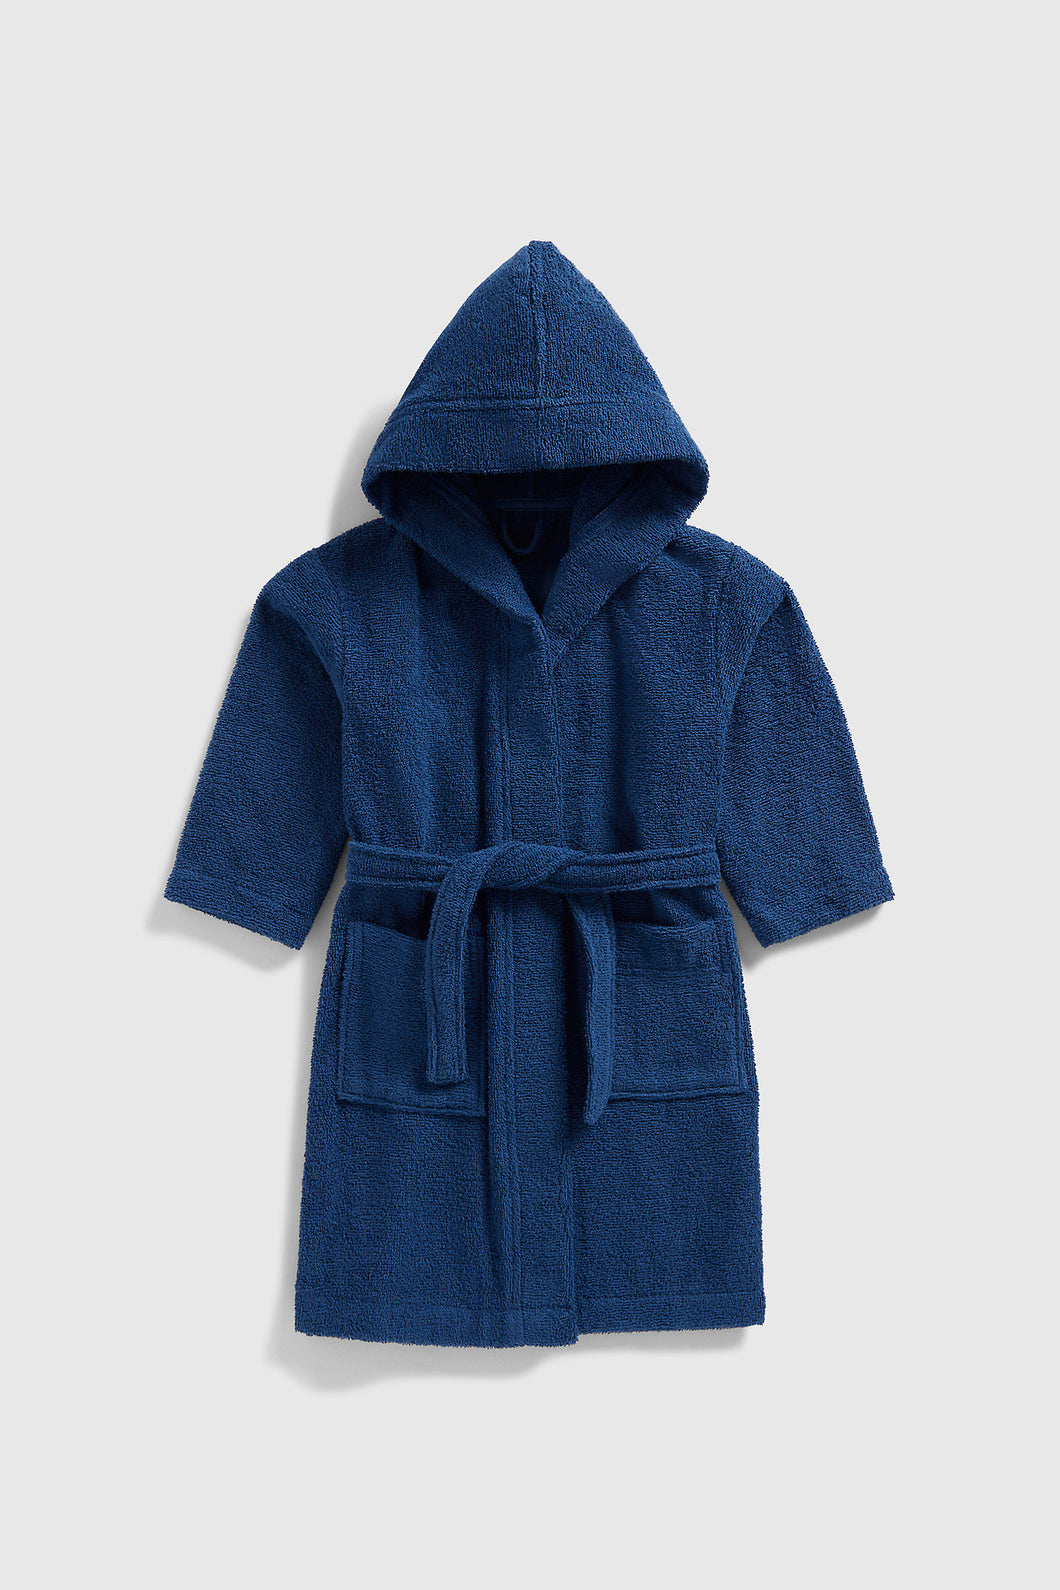 Mothercare Navy Towelling Hooded Robe